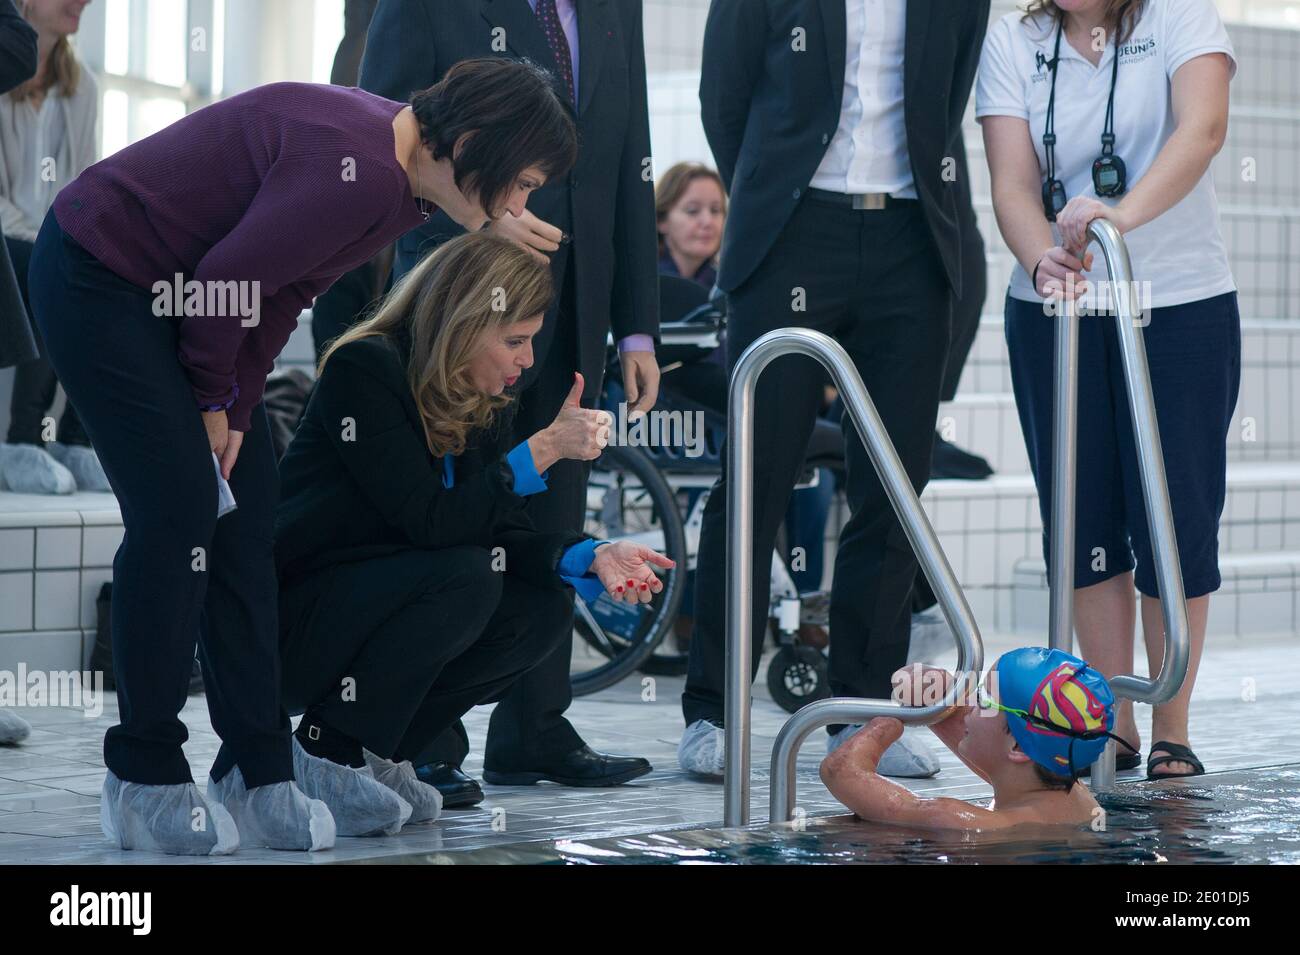 Companion of France's President Valerie Trierweiler and French Junior Minister for Disabled People Marie-Arlette Carlotti talk with next to Theo, a 13-year-old 4-limb amputee, standing in a pool, as part of their visit on November 27, 2013 in Vichy, central France. Theo is a grant holder of the disabled sports branch of the French Expertise and Performance Ressource Centre (CREPS) of Vichy Auvergne, where he trains in swimming. In early 2013, he competed for the first time in the French disabled swimming championships. At left is seen French Handisports Federation President Gerard Masson. Phot Stock Photo